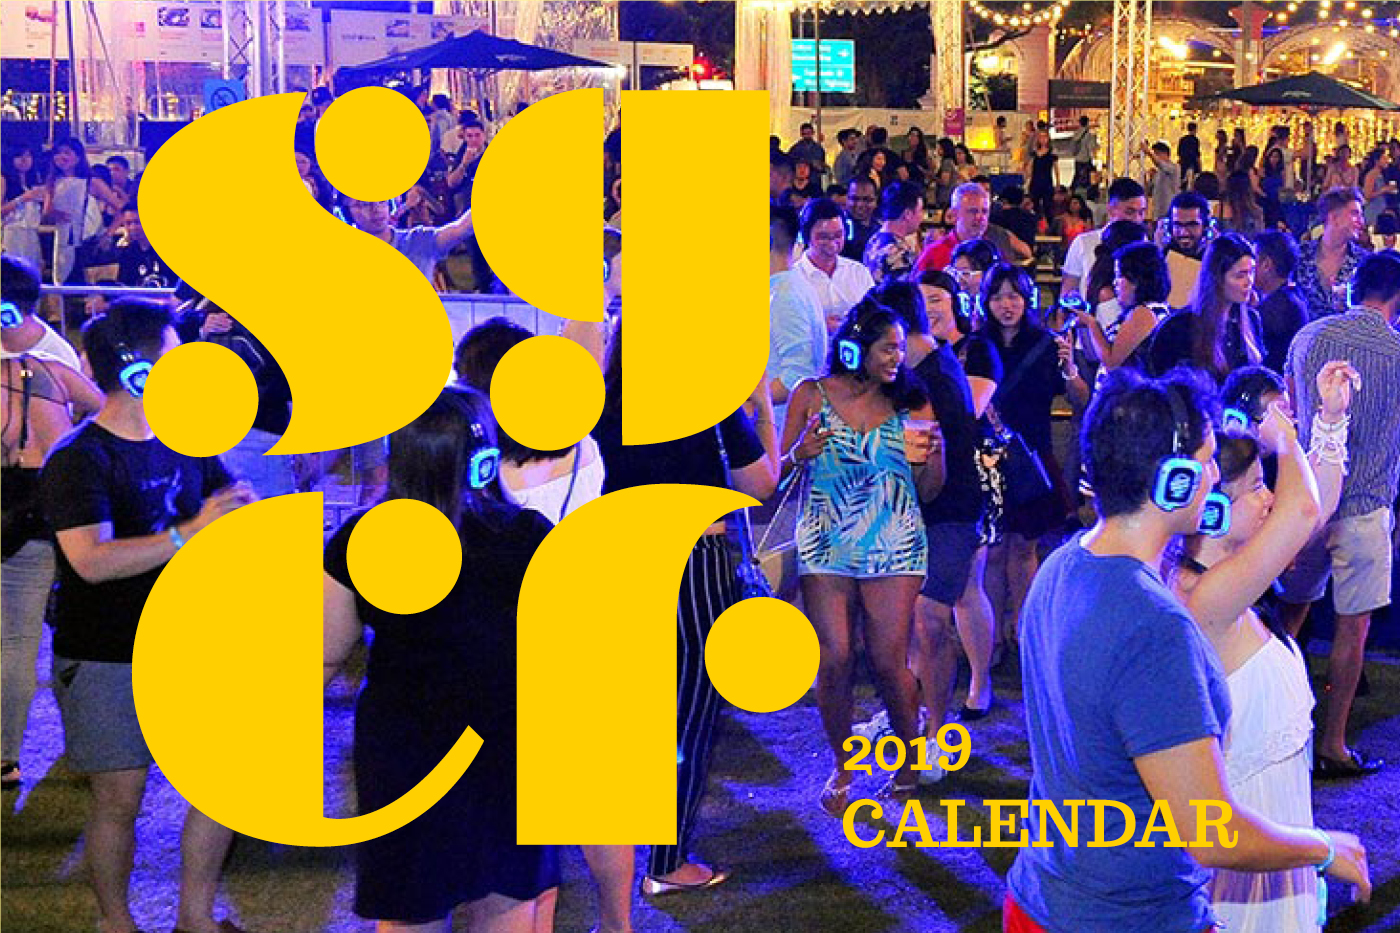 Singapore Cocktail Festival 2019 Calendar: Your Ultimate Industry Guide photo